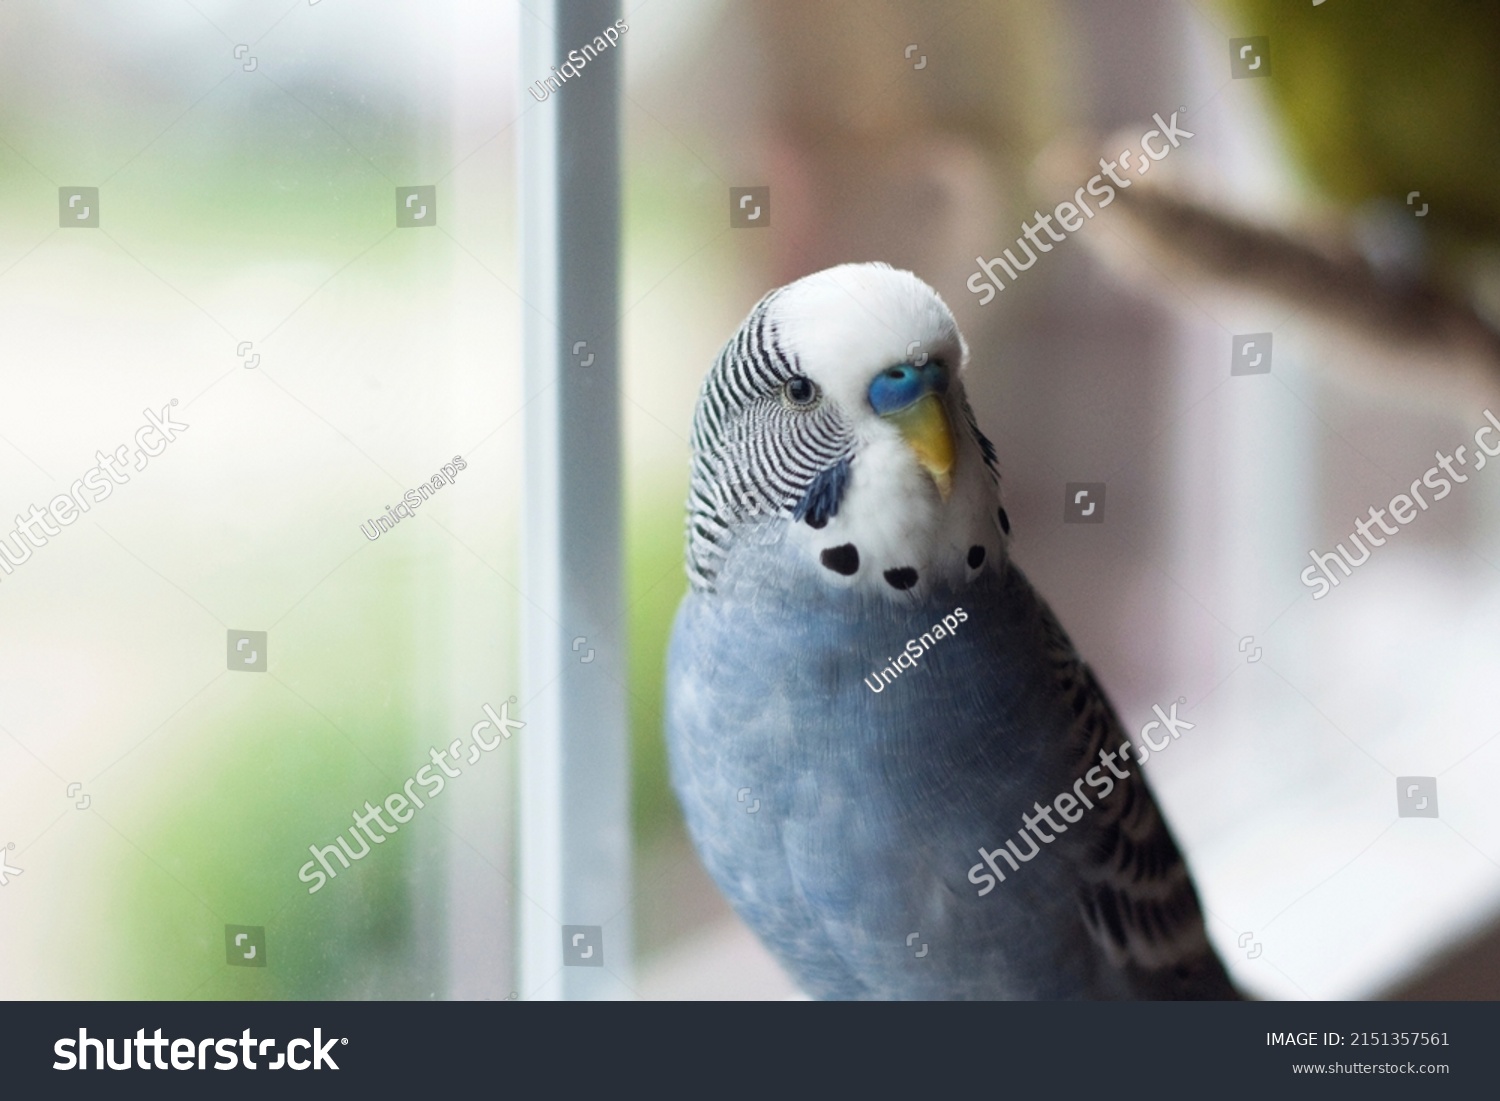 Happy Healthy Young Mauve Budgie Blue budgie singing by the window on a beautiful afternoon in spring #2151357561